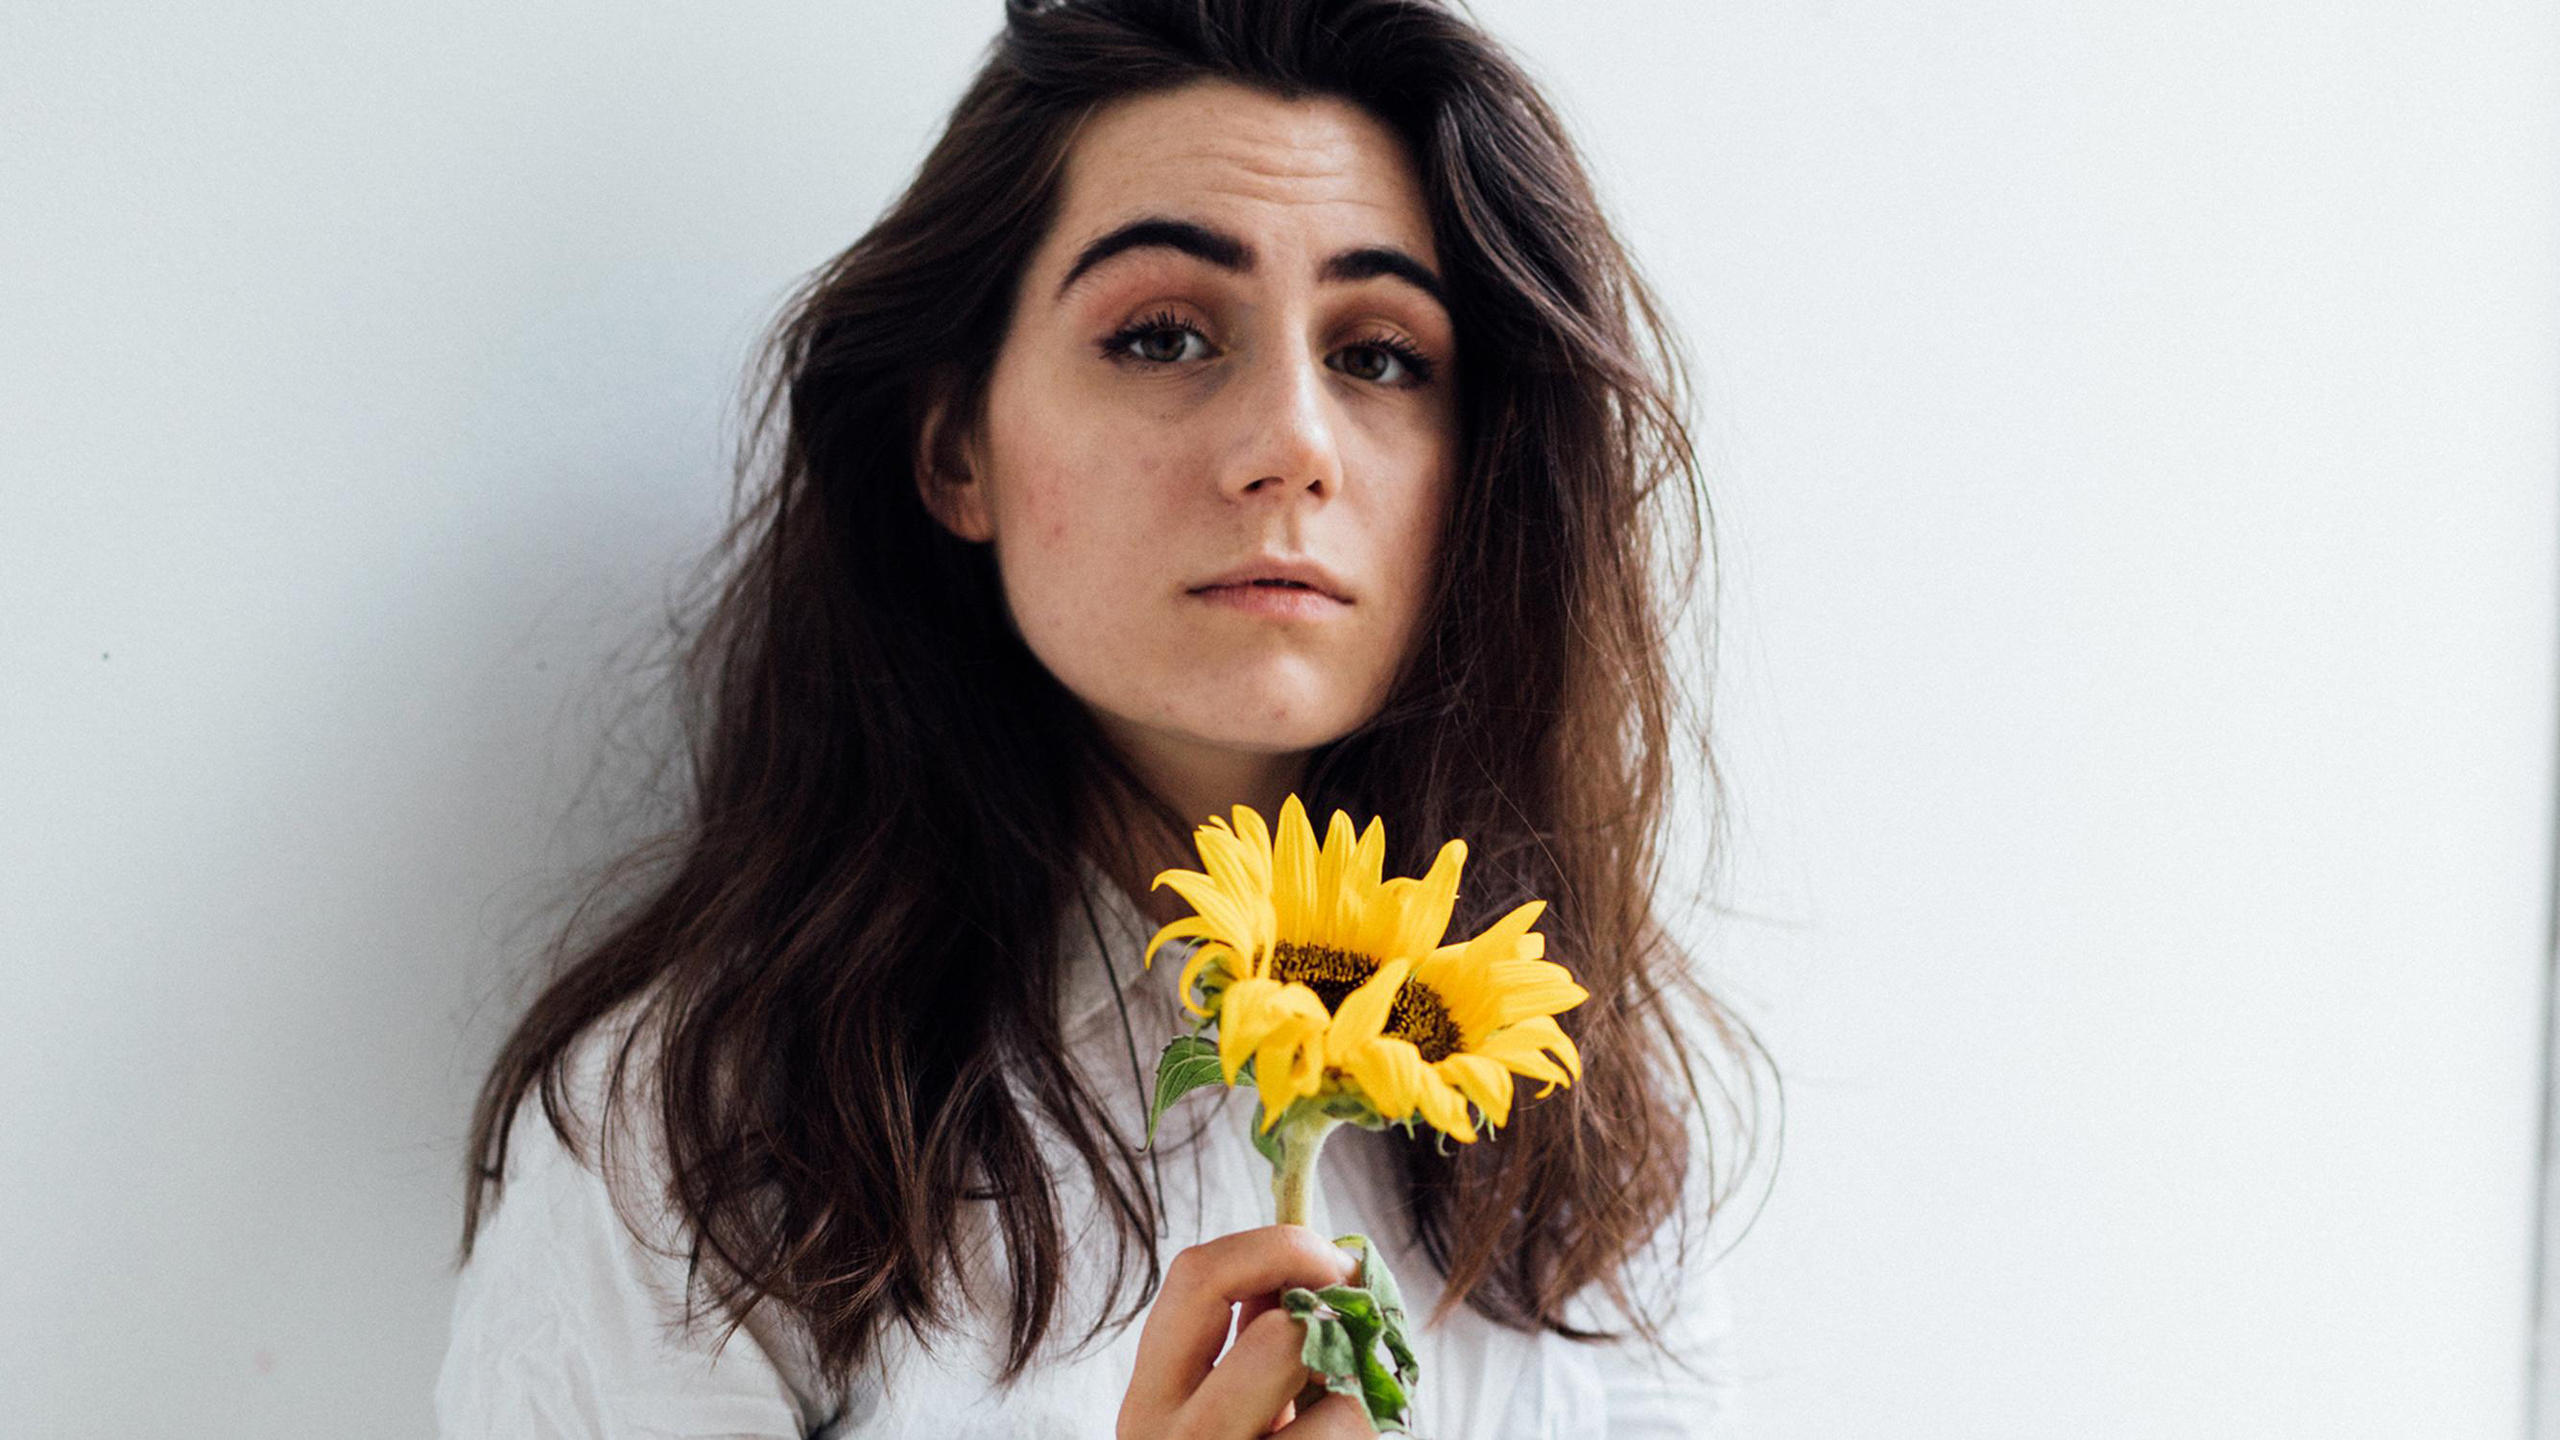 Dodie With Yellow Flower Is Wearing White Dress 2K Dodie